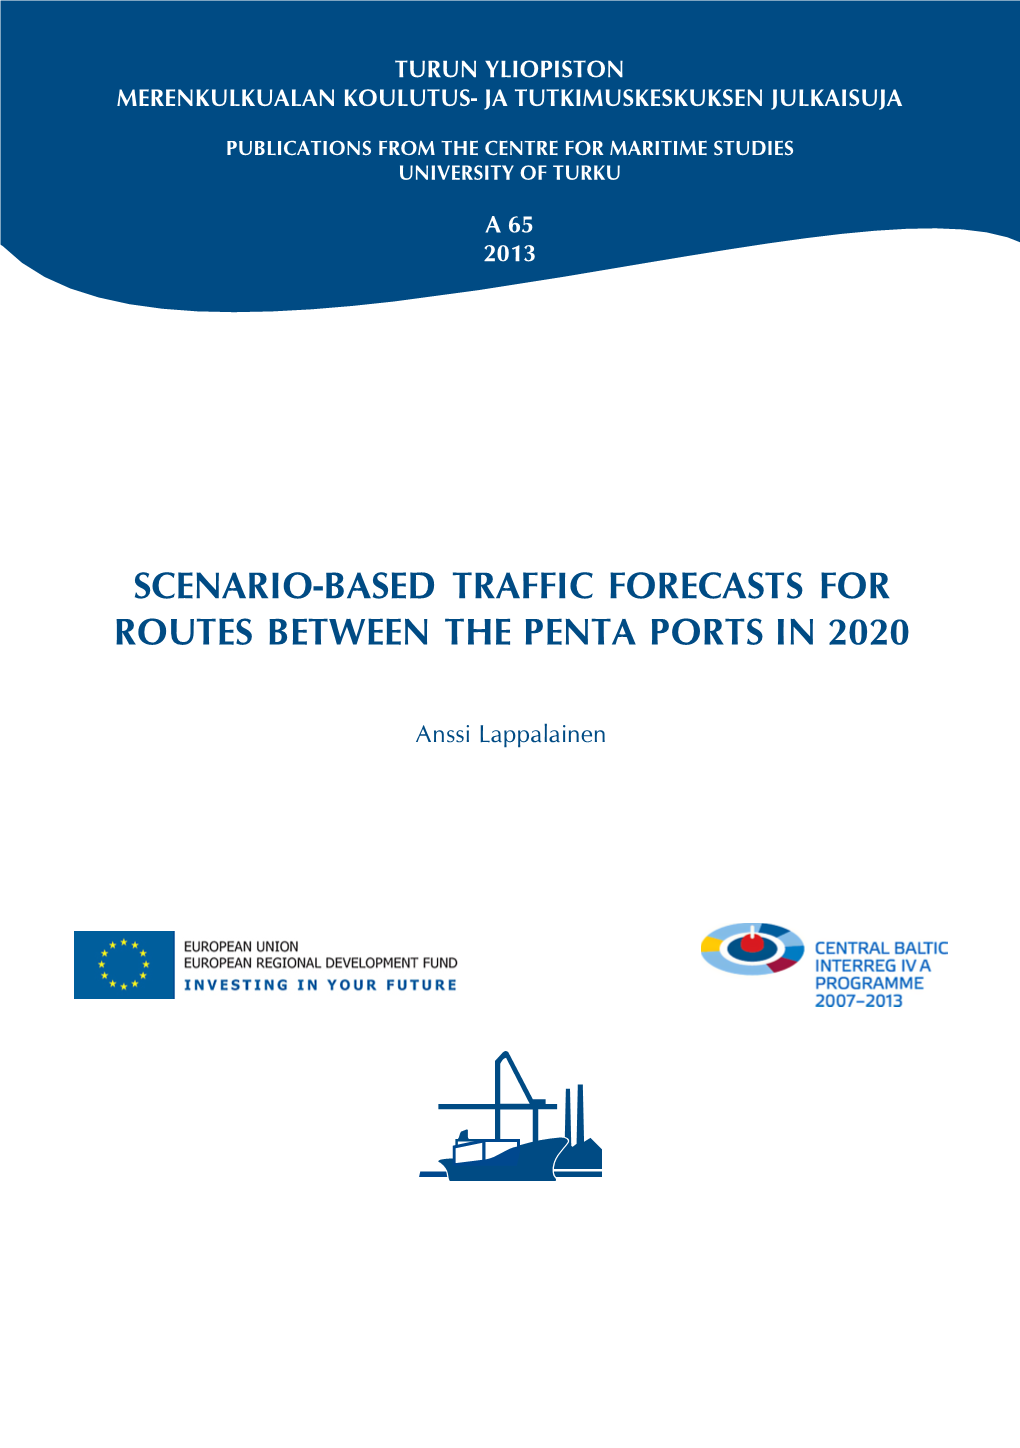 Scenario-Based Traffic Forecasts for Routes Between the Penta Ports in 2020